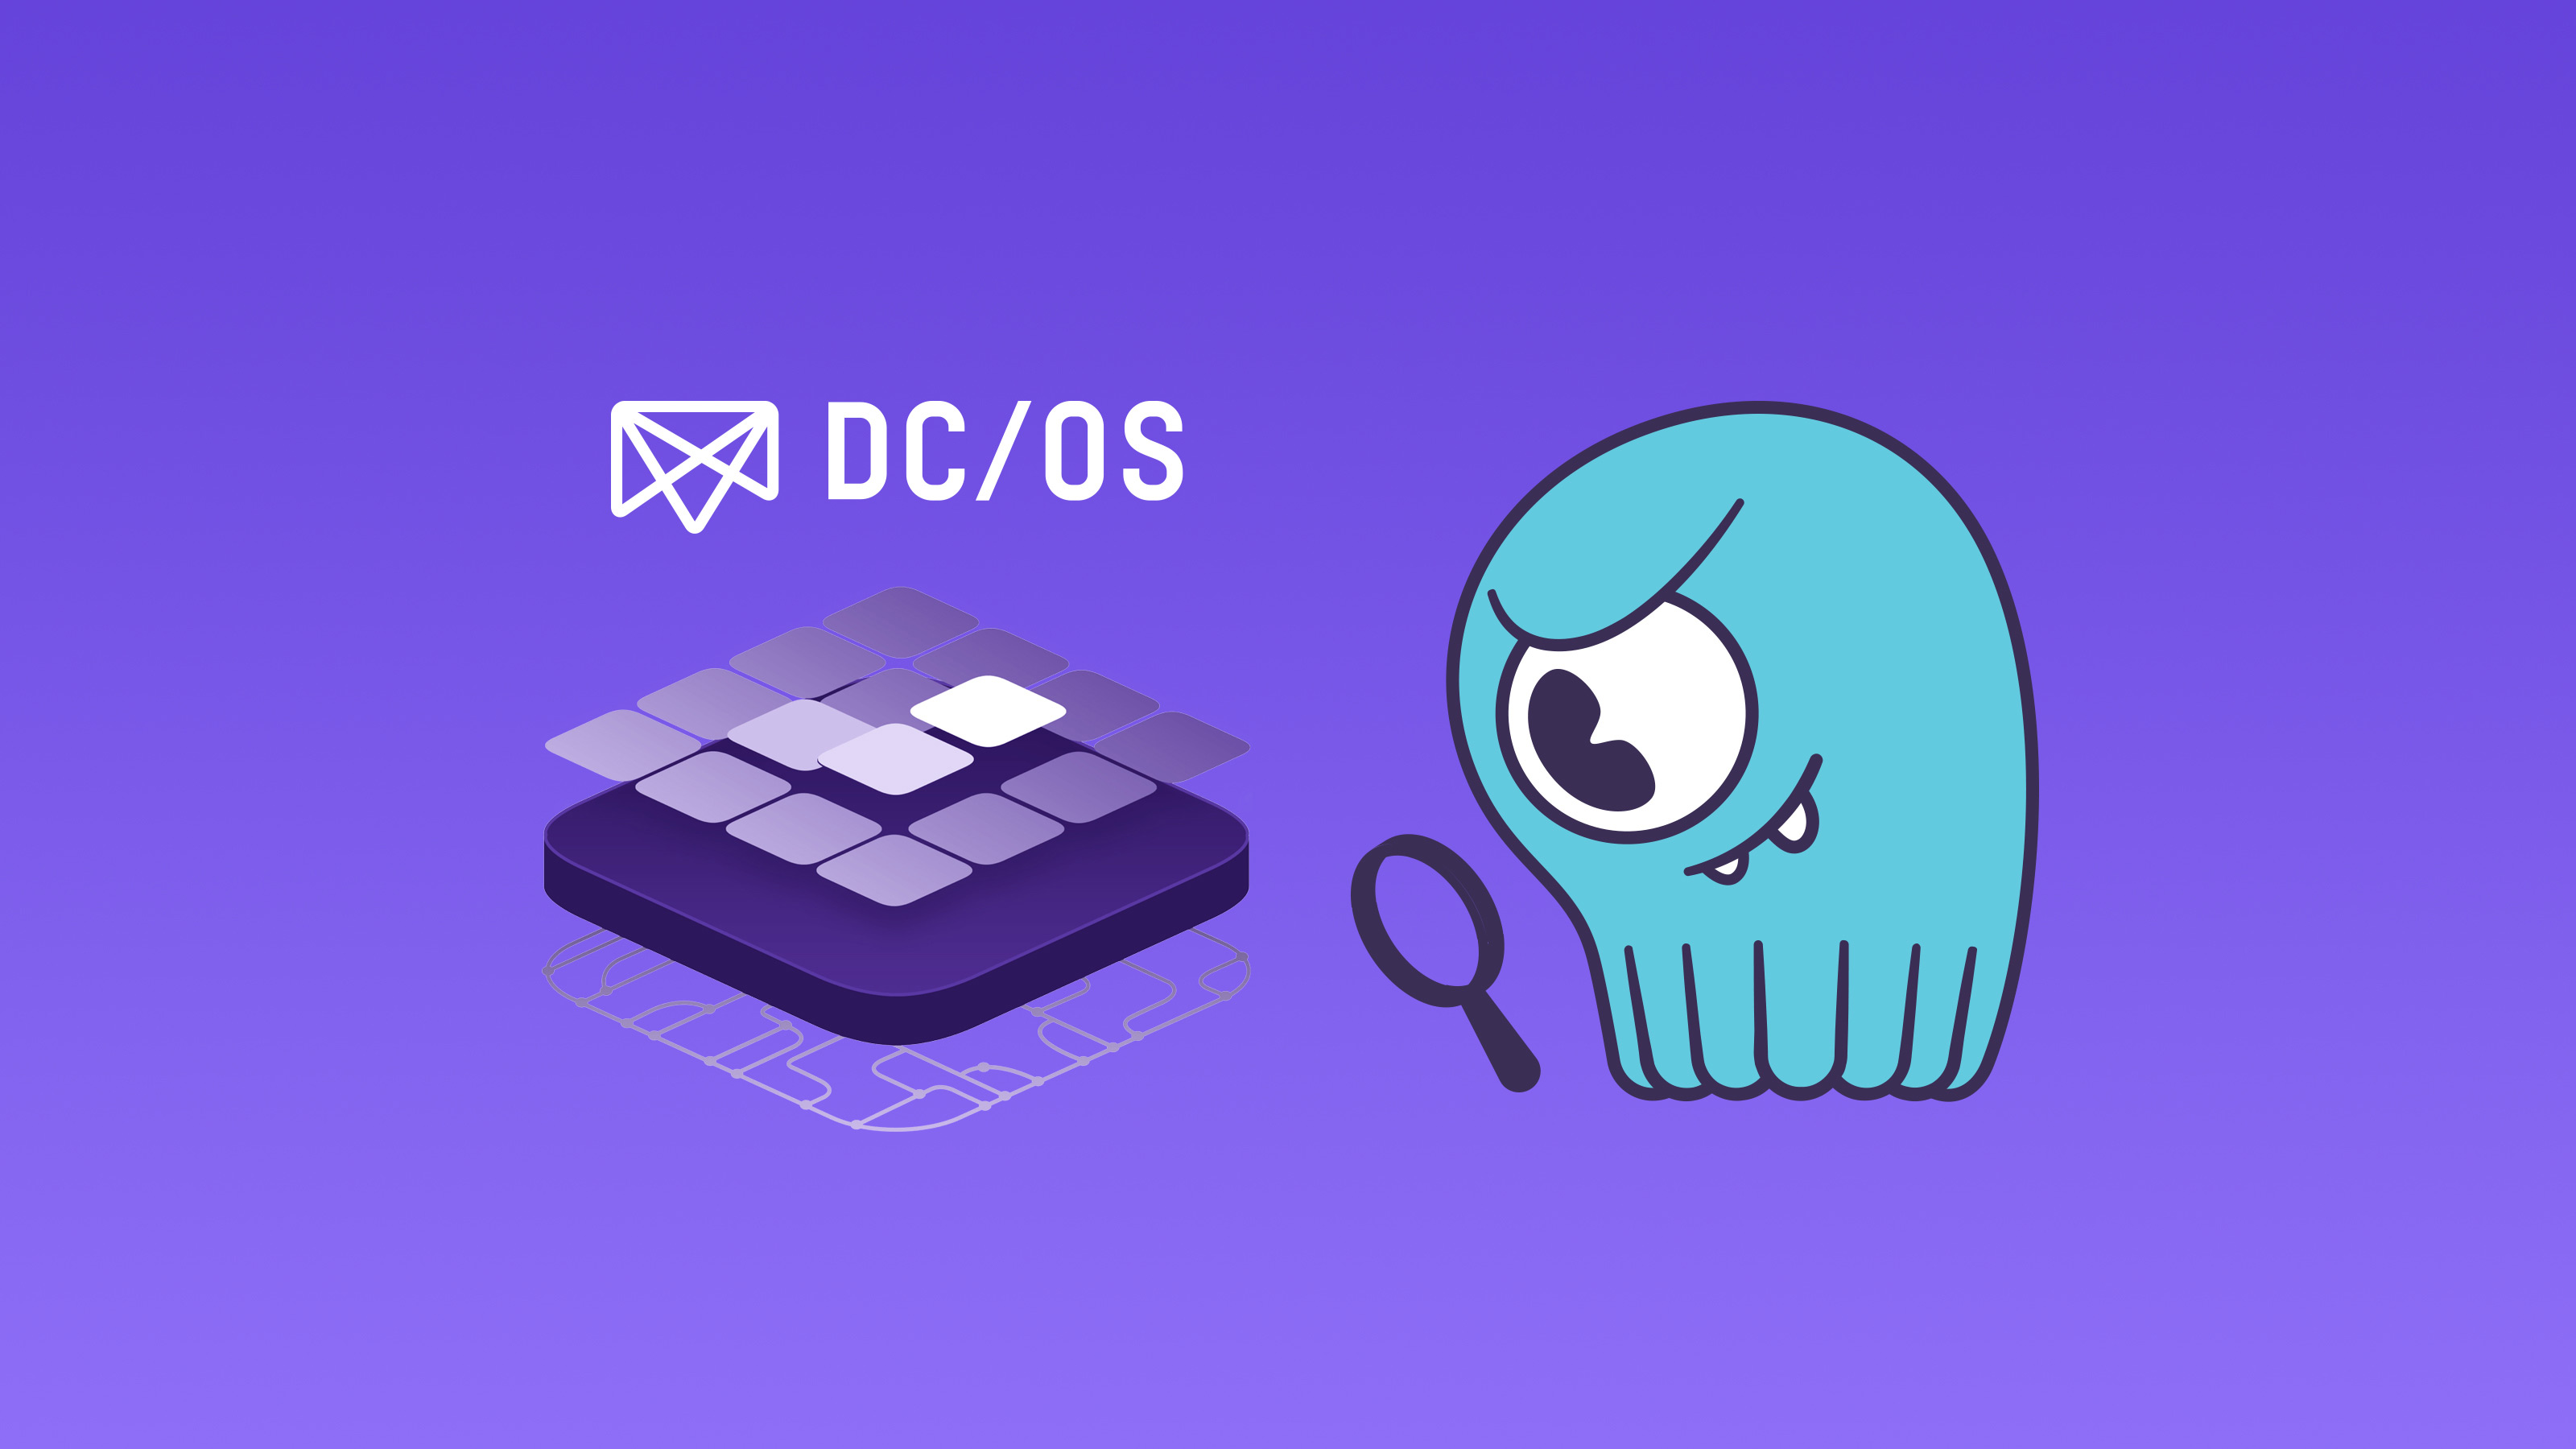 Guest Post: Running Scylla on the DC/OS Distributed Operating System